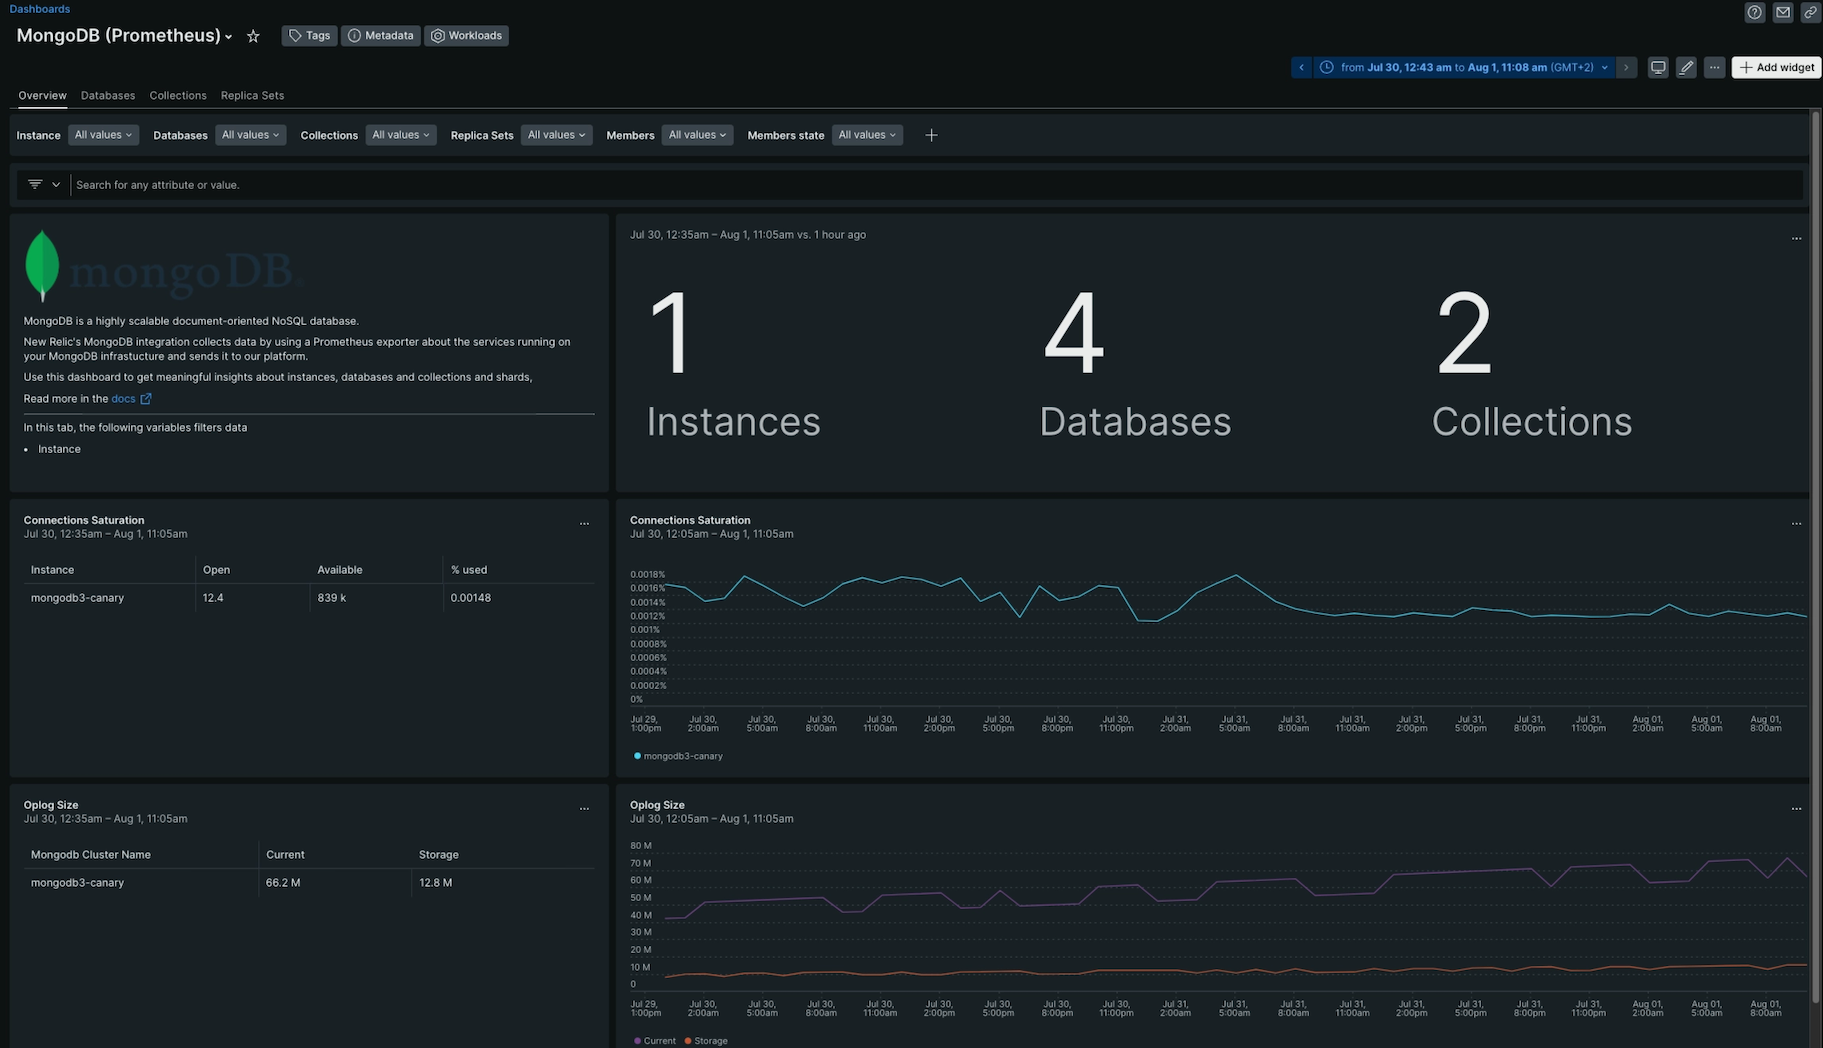 Image of the dashboard available through the MongoDB quickstart